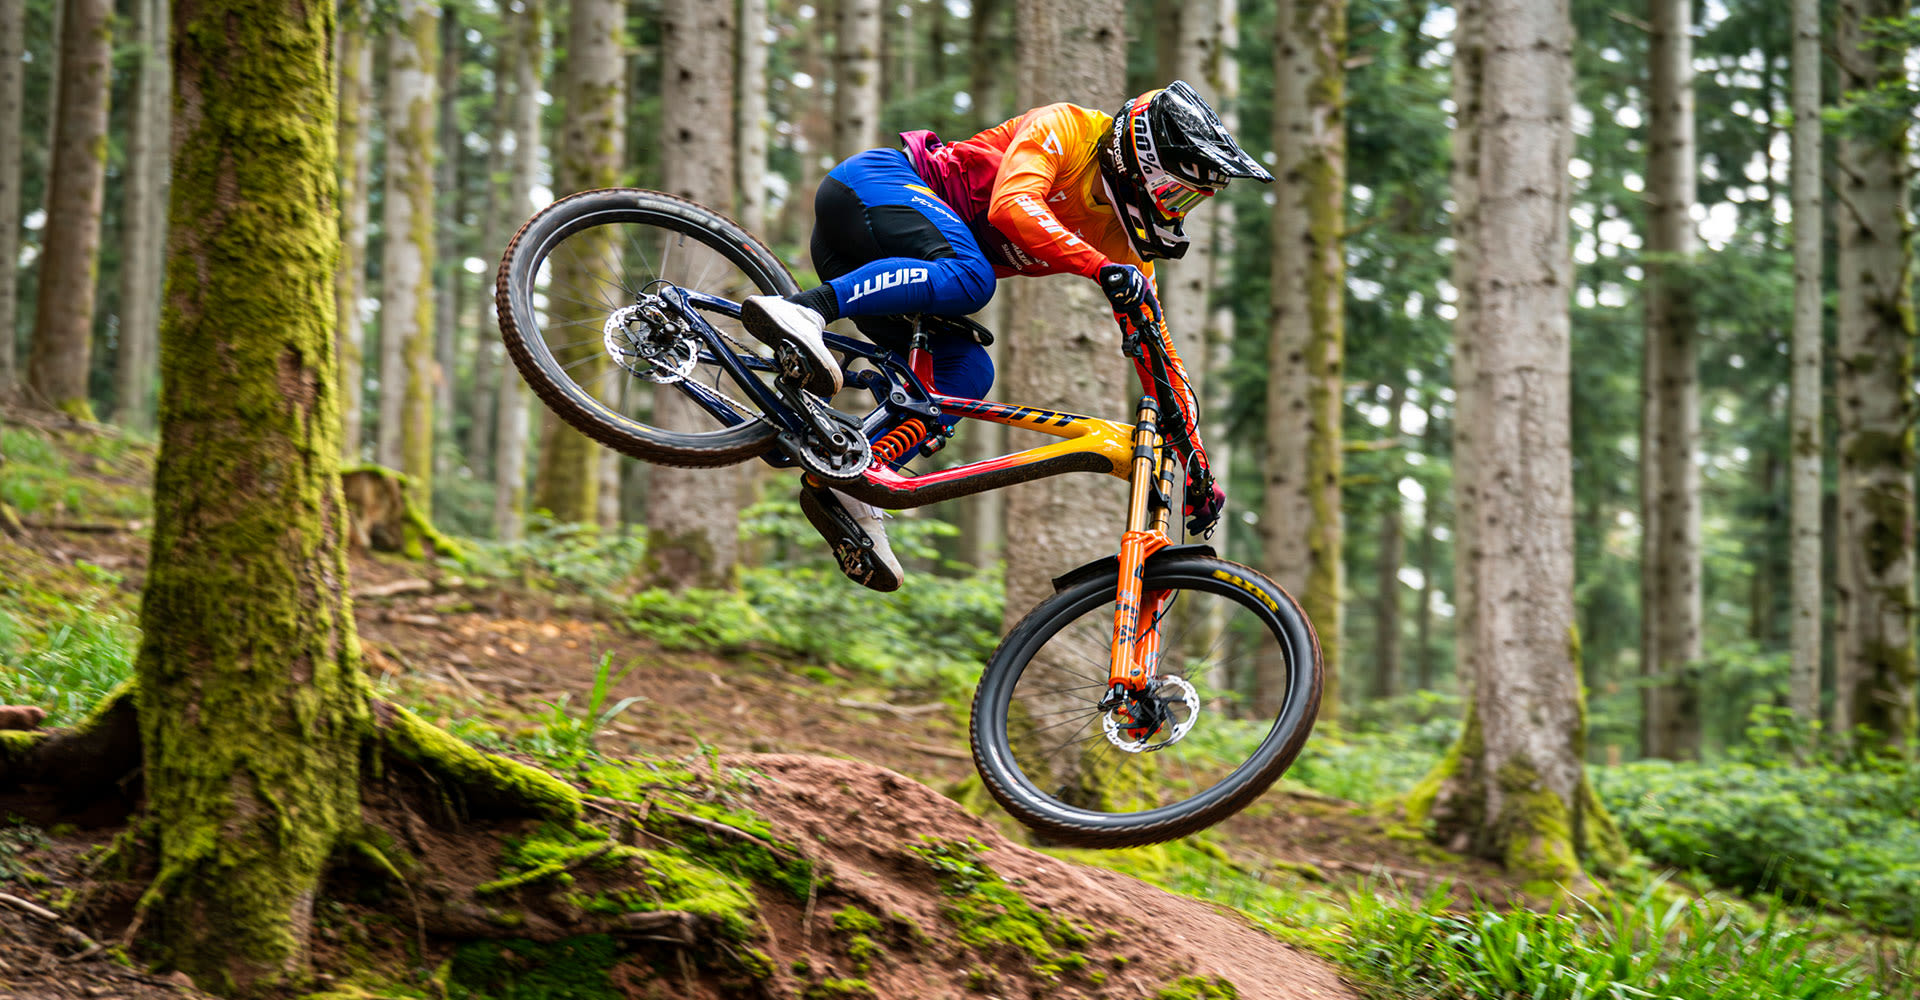 Glory Advanced Downhill Racing Bike | Giant Bicycles Official site